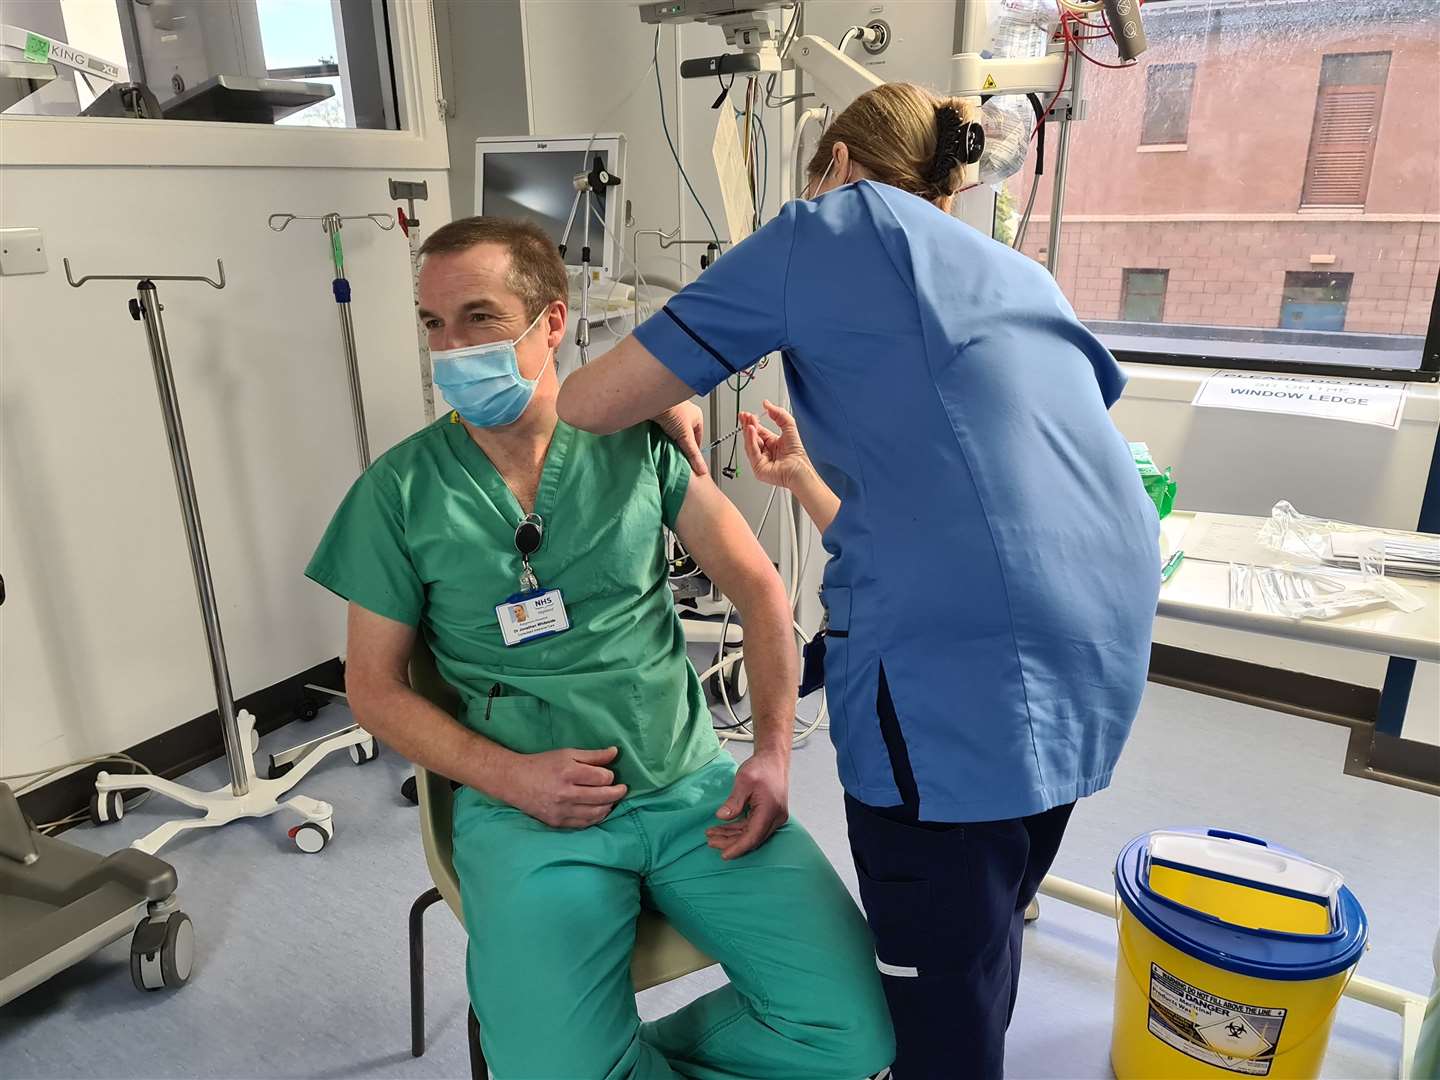 Dr Jonathan Whiteside, clinical lead for critical care with NHS Highland, was the first person to be vaccinated within the health board area. Maureen Sutherland administered the vaccine at Raigmore.